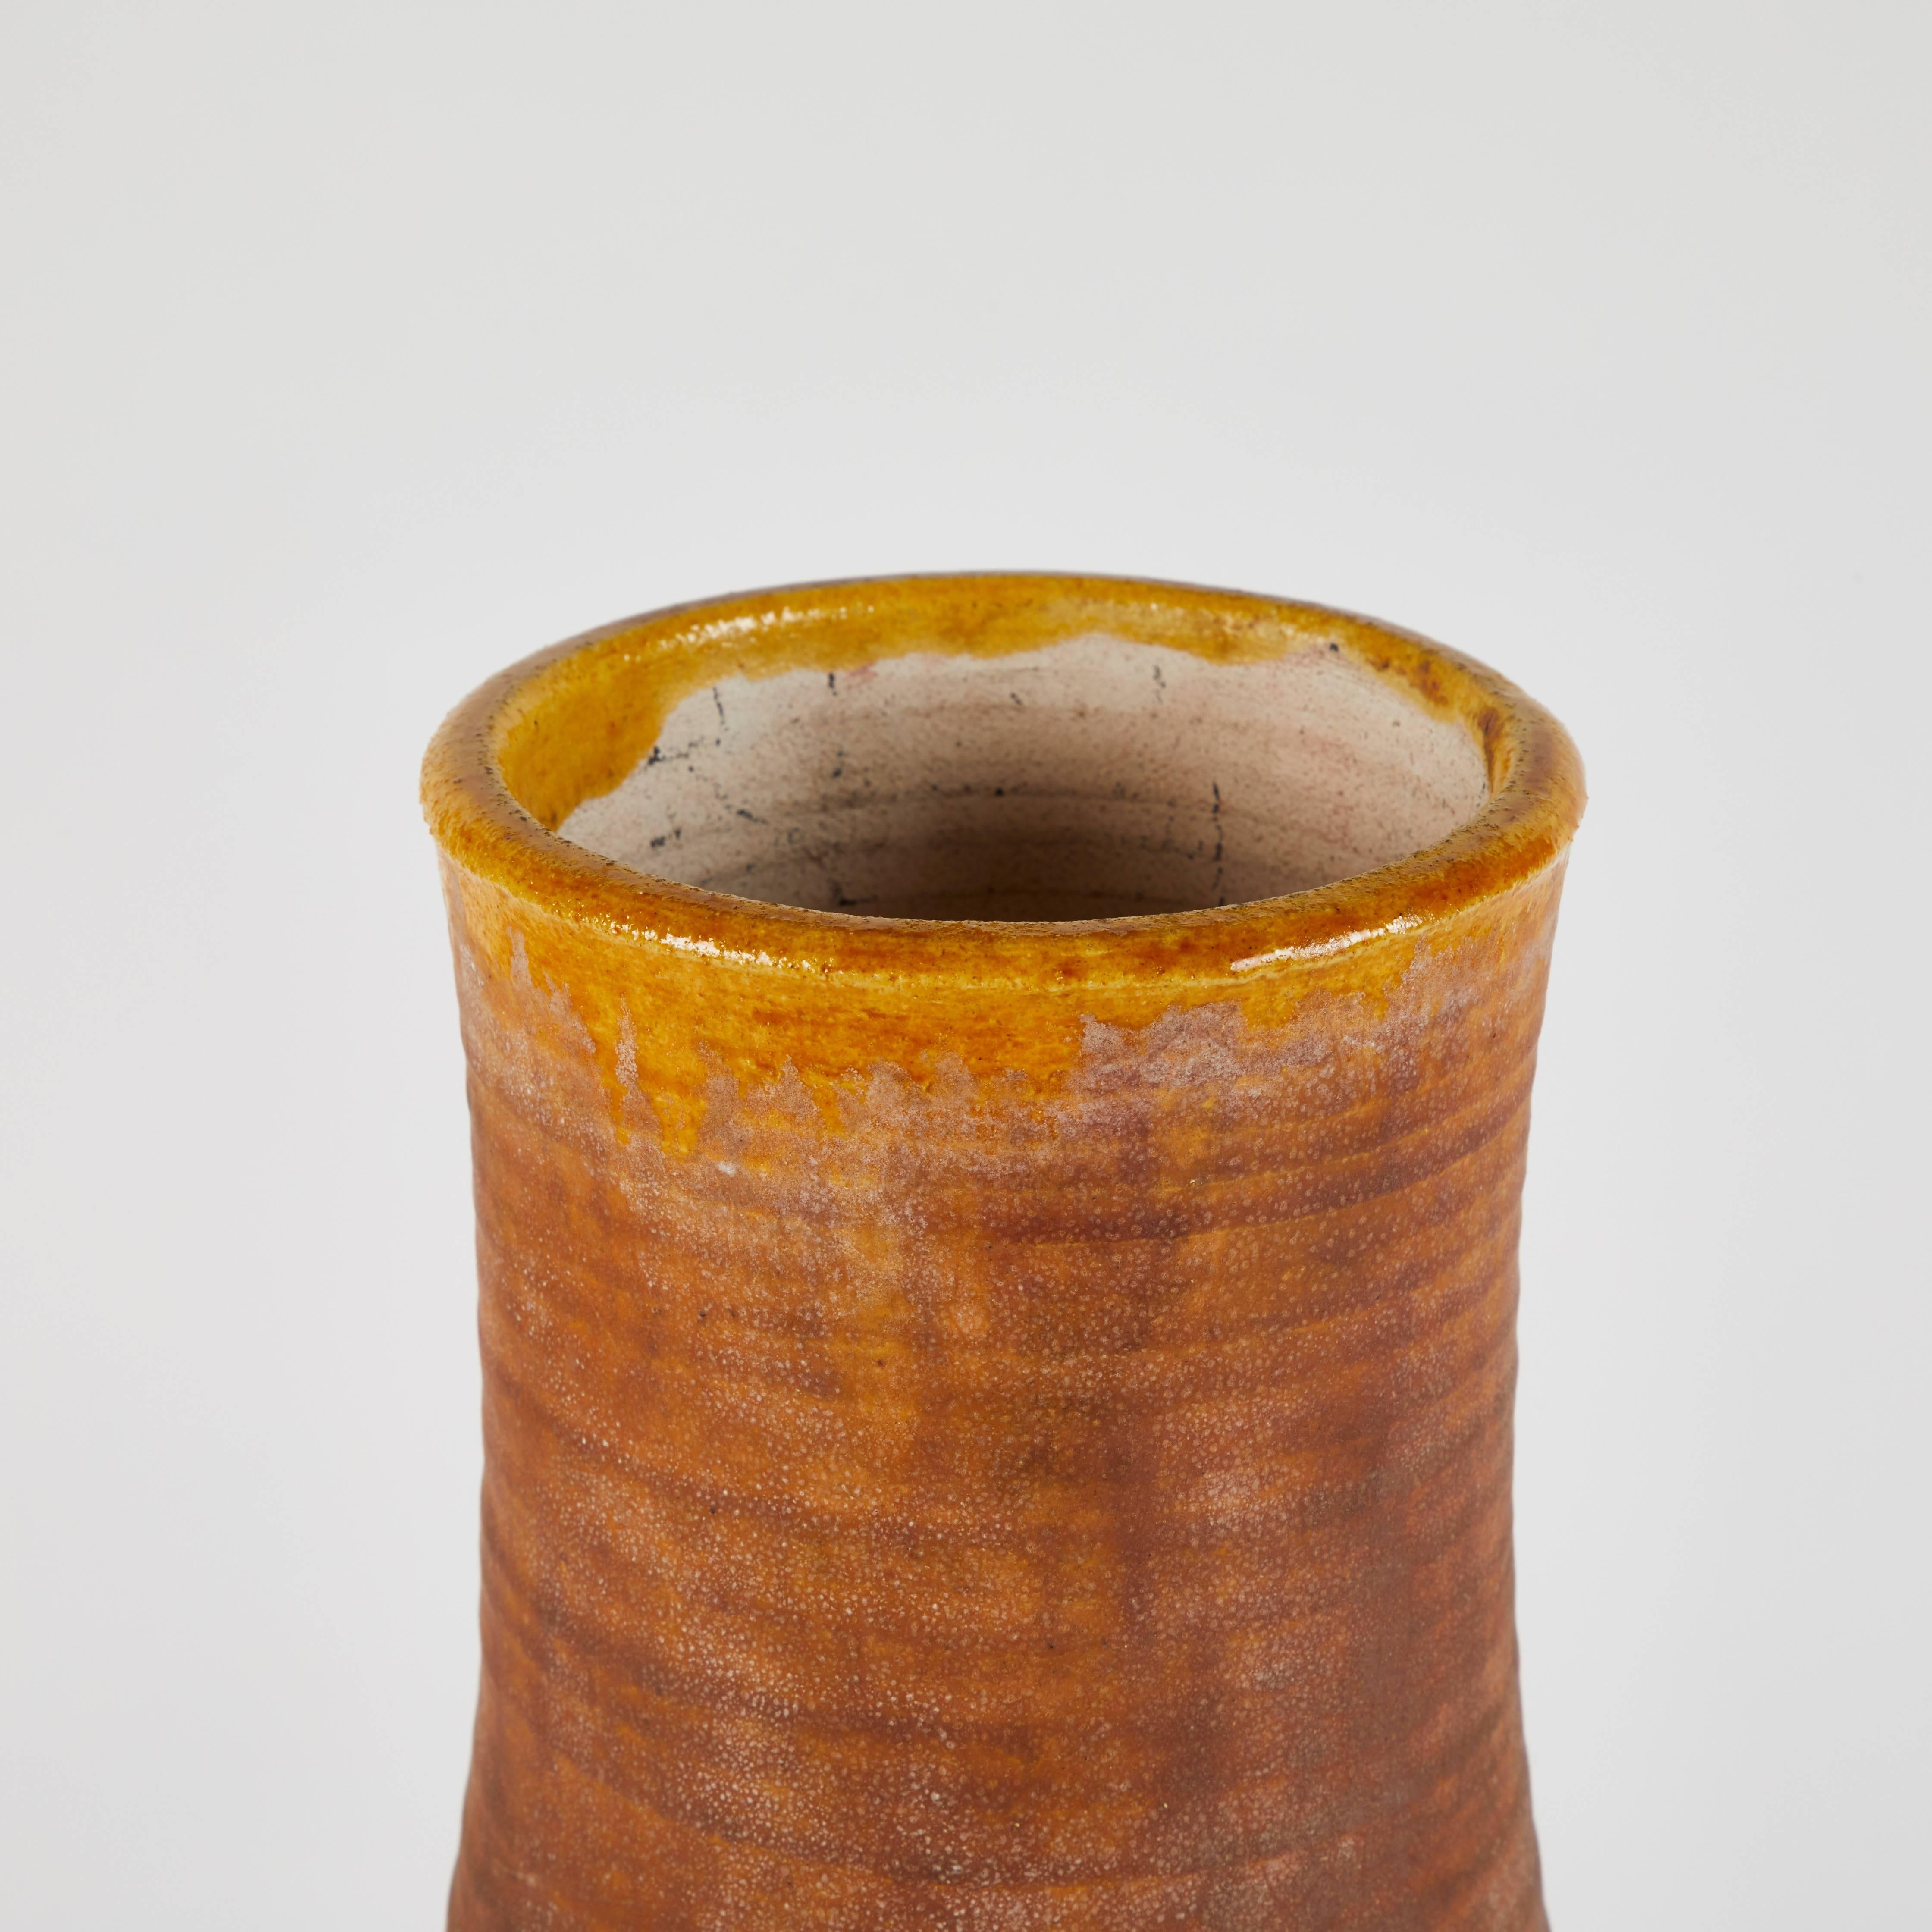 1930s pottery vase with natural orange exterior and glazed interior.